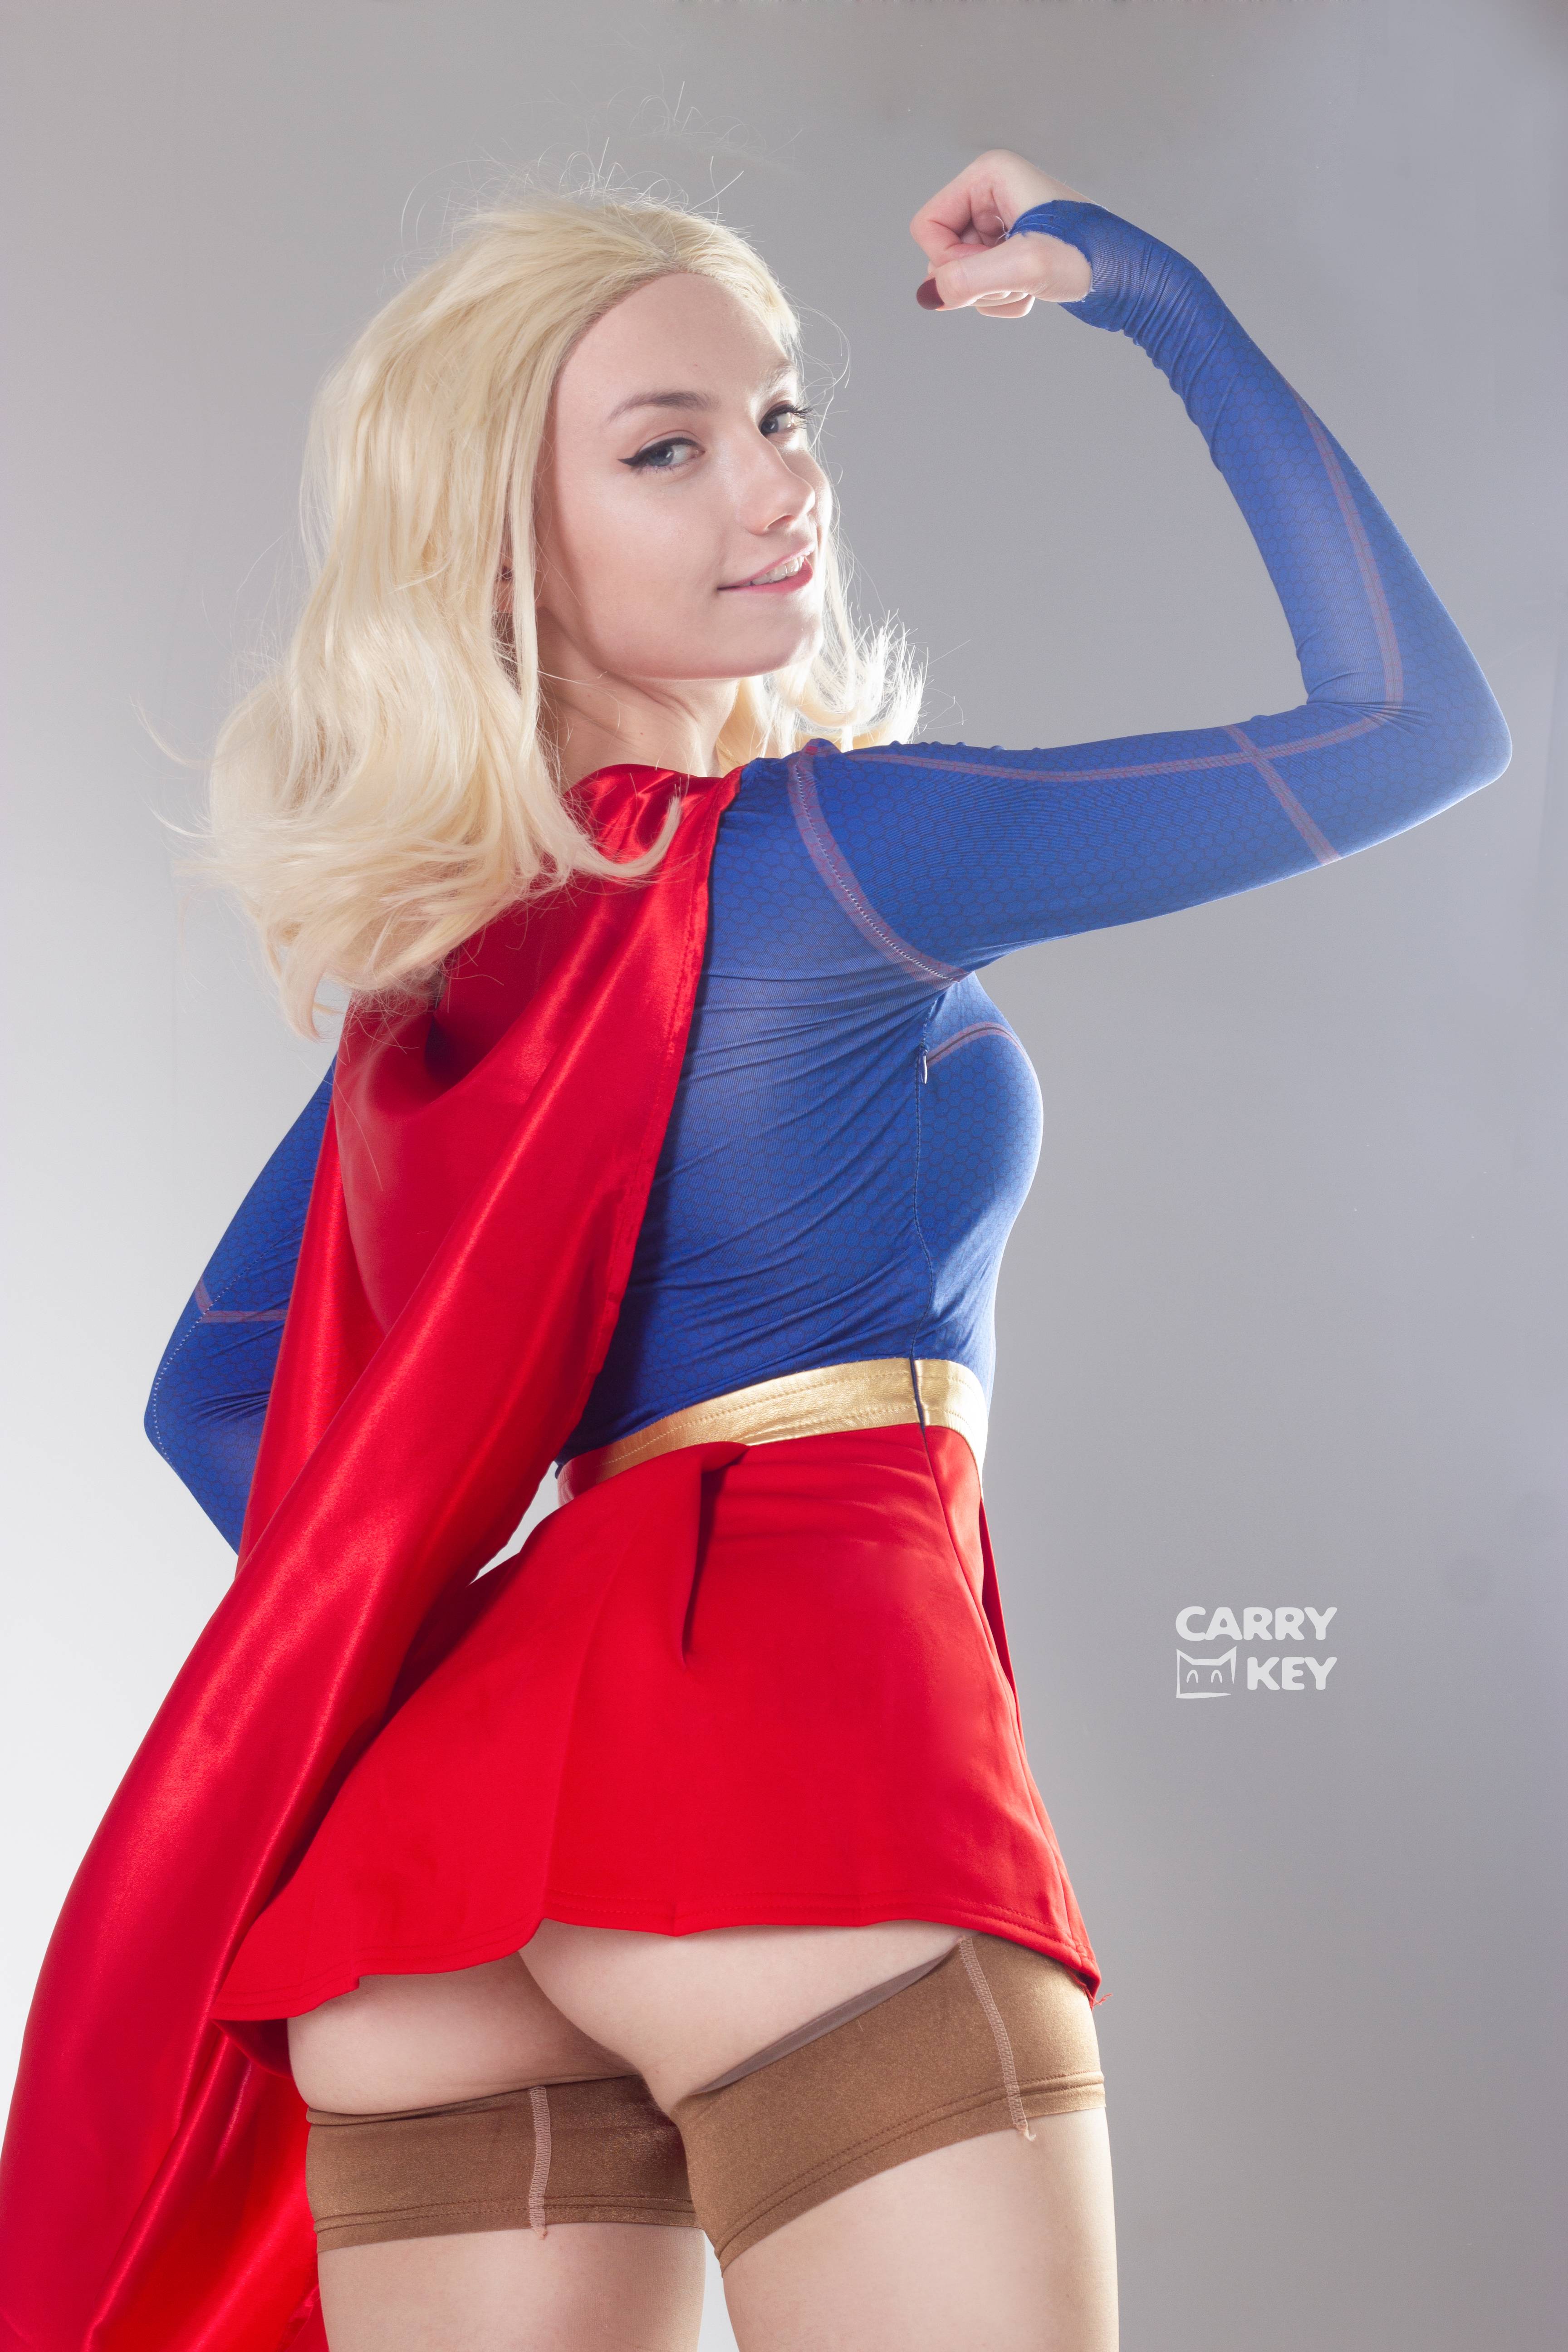 Superwoman Cosplay Porn - We can! | cosplay by CarryKey Porn Pic - EPORNER